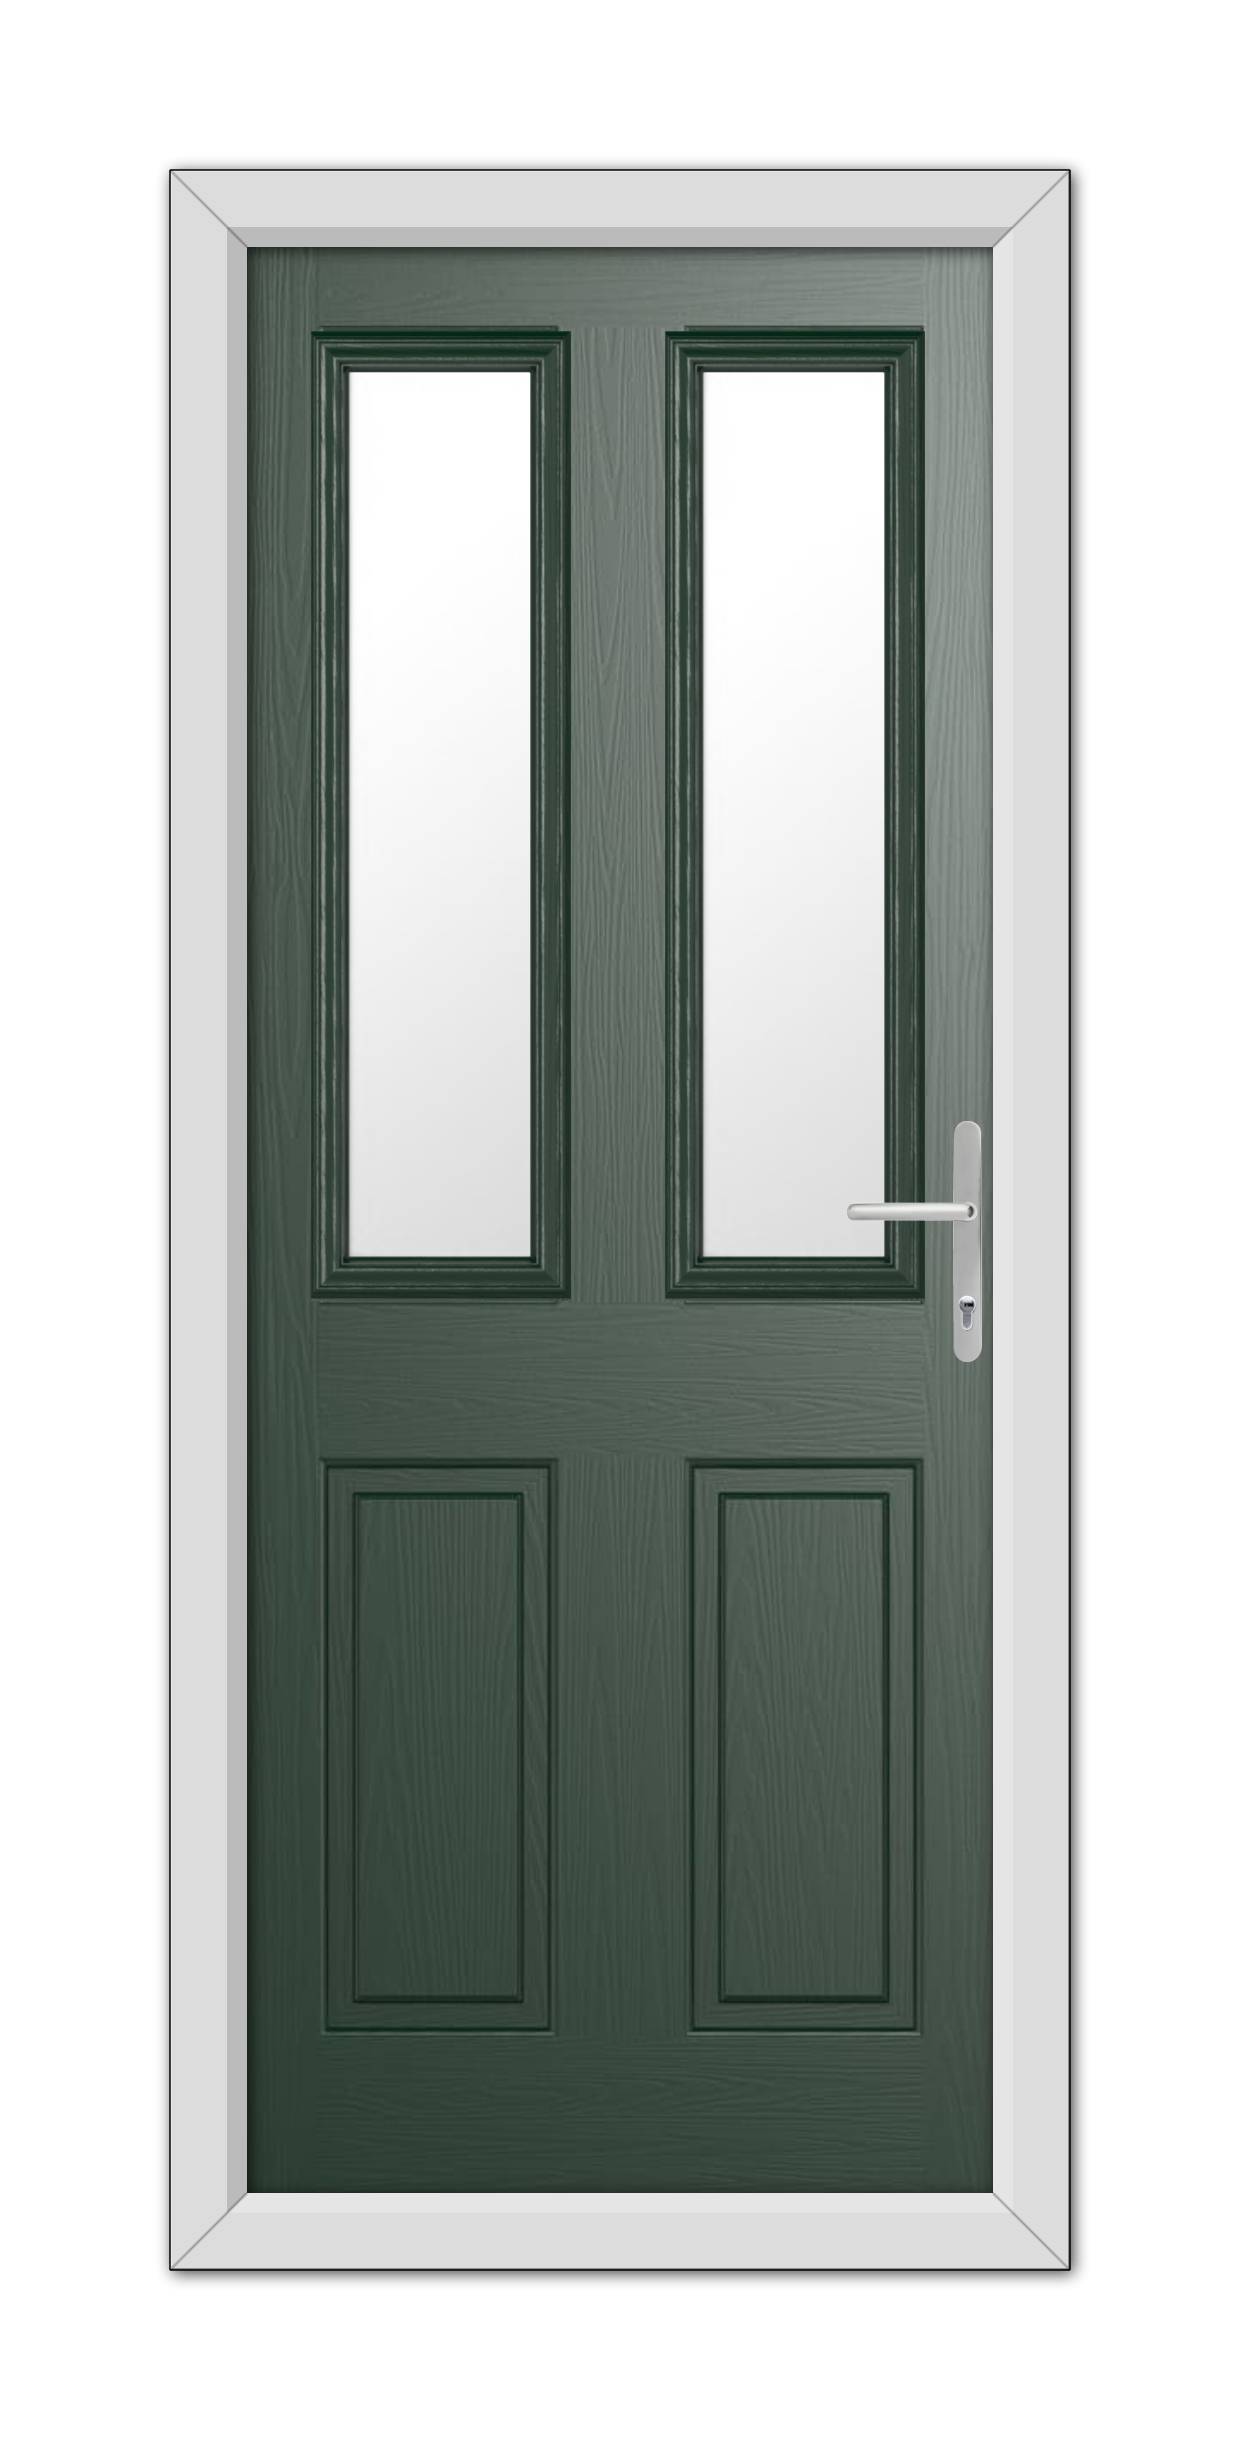 A Green Whitmore Composite Door 48mm Timber Core with white frame, featuring two vertical glass panels and a modern handle on the right side.